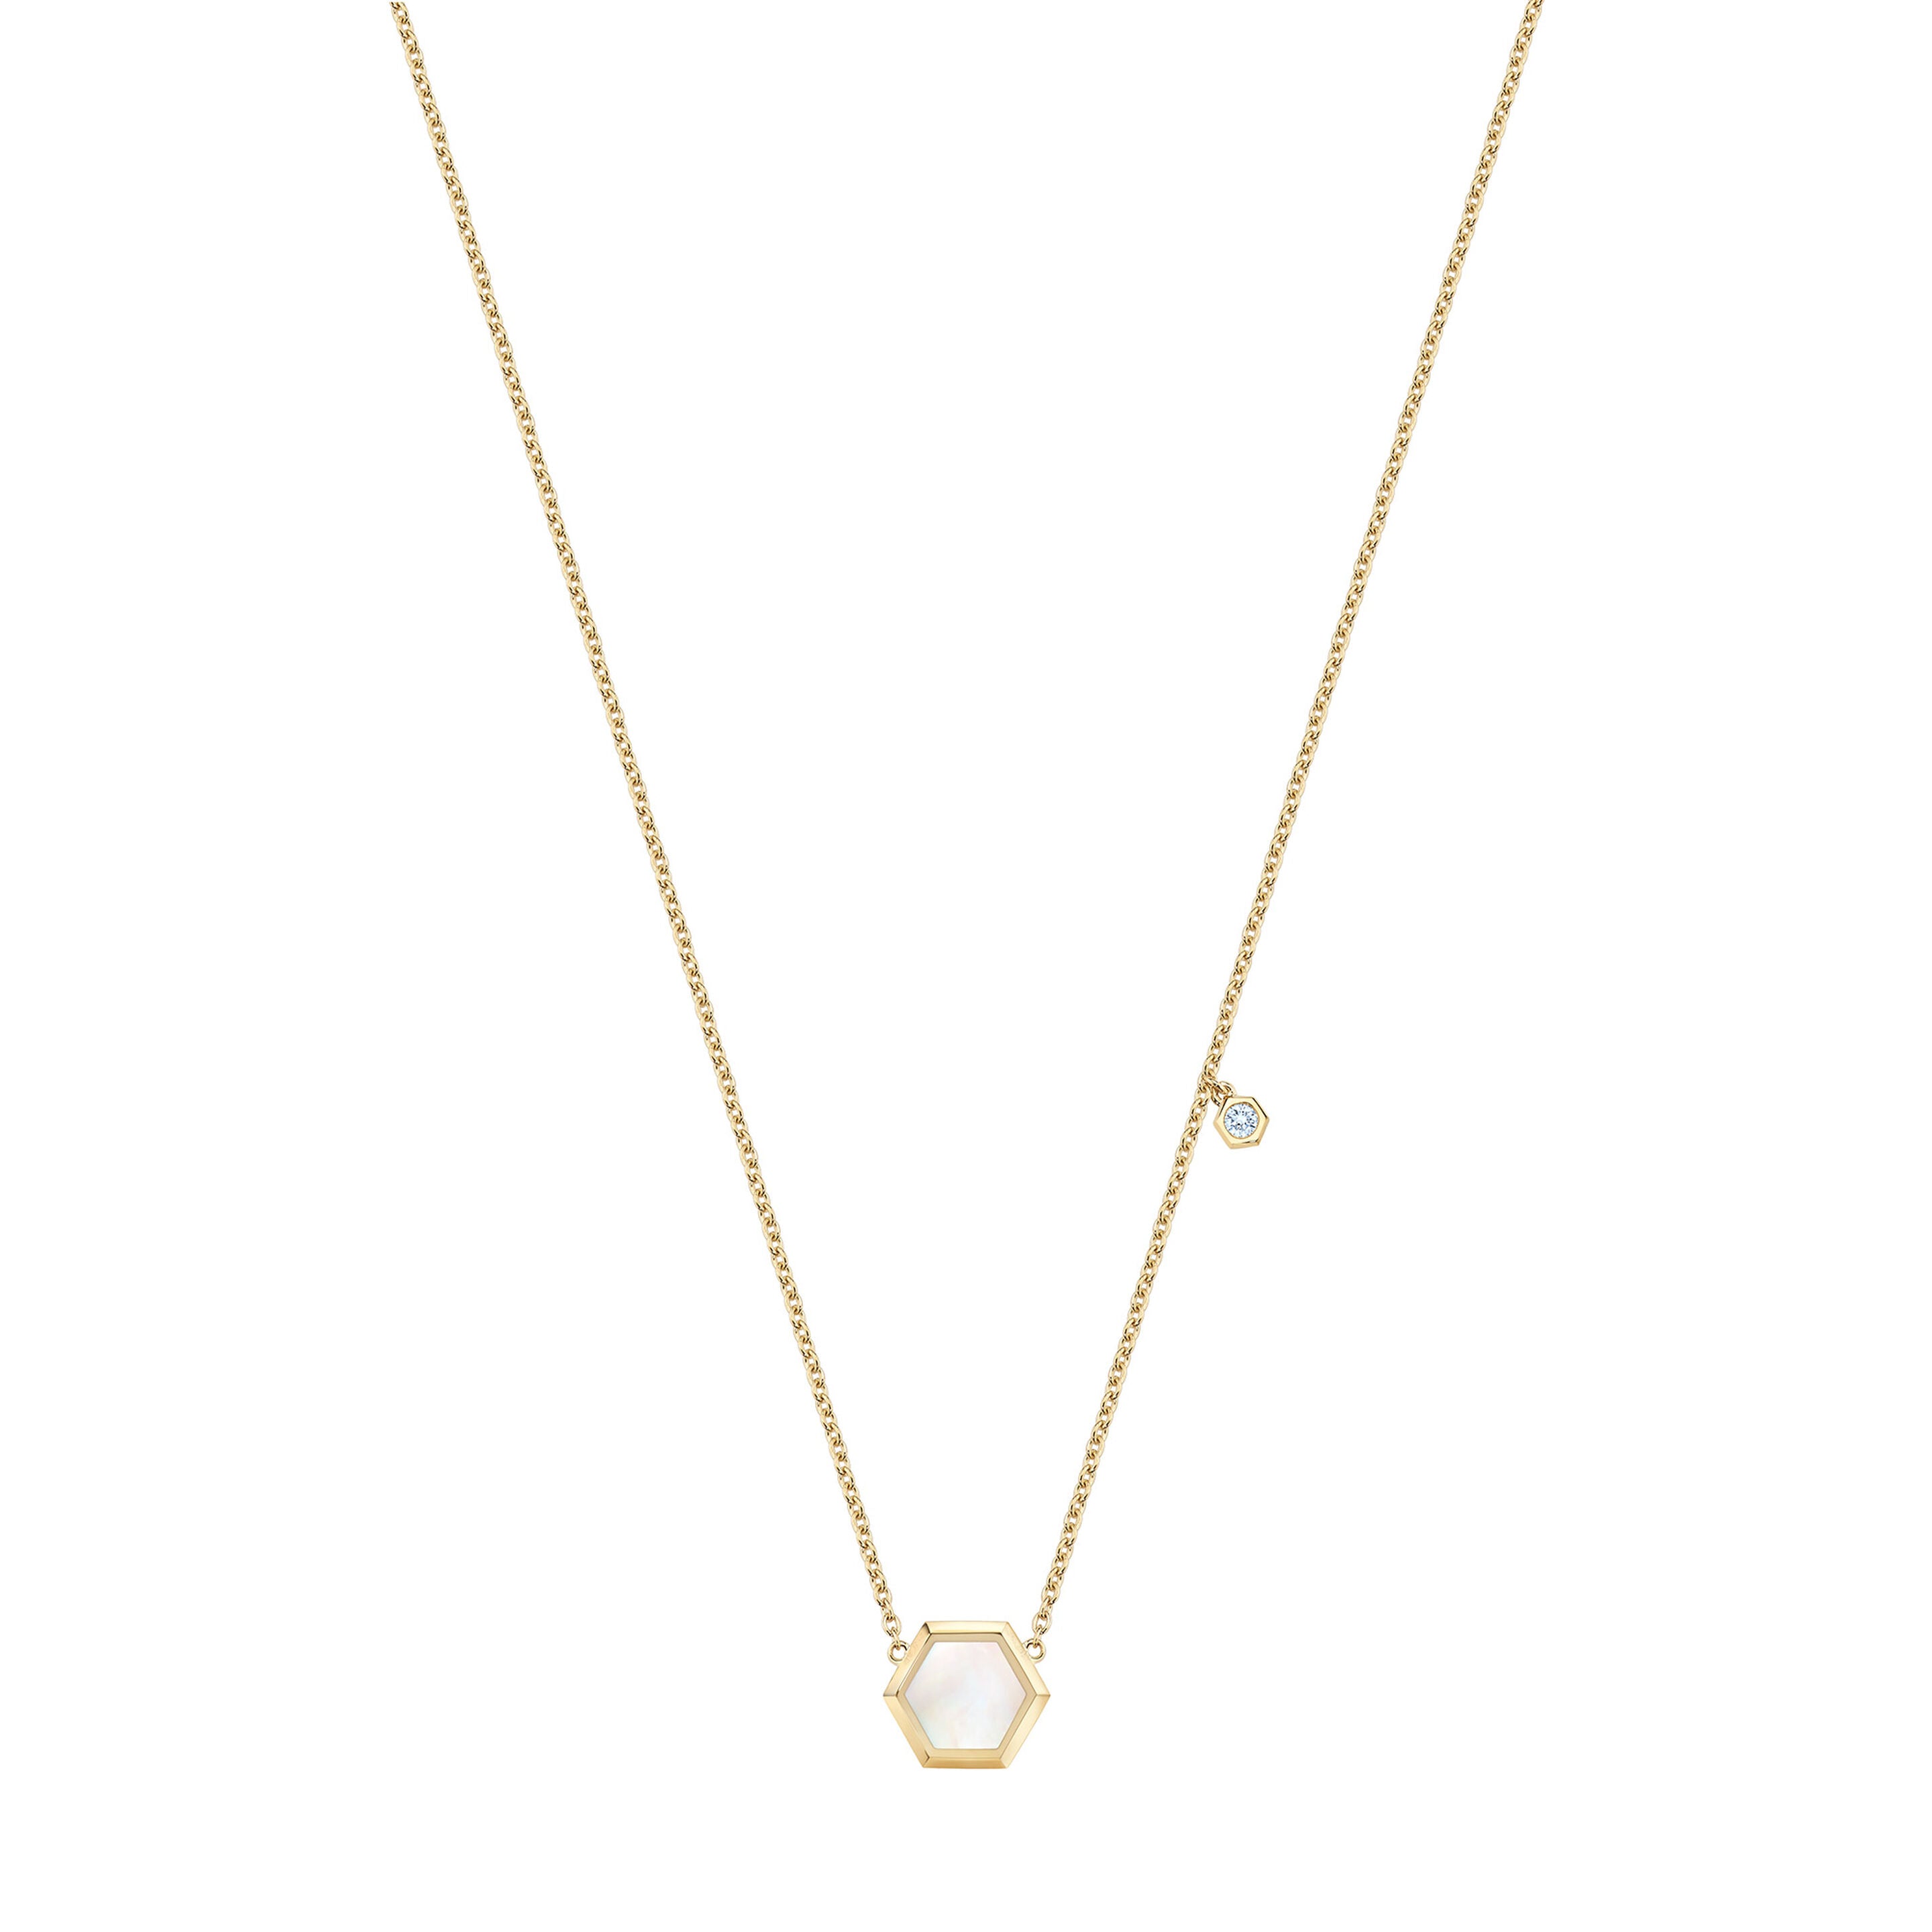 Birks Sterling Muse Monogram Station Necklace, 36 Inches